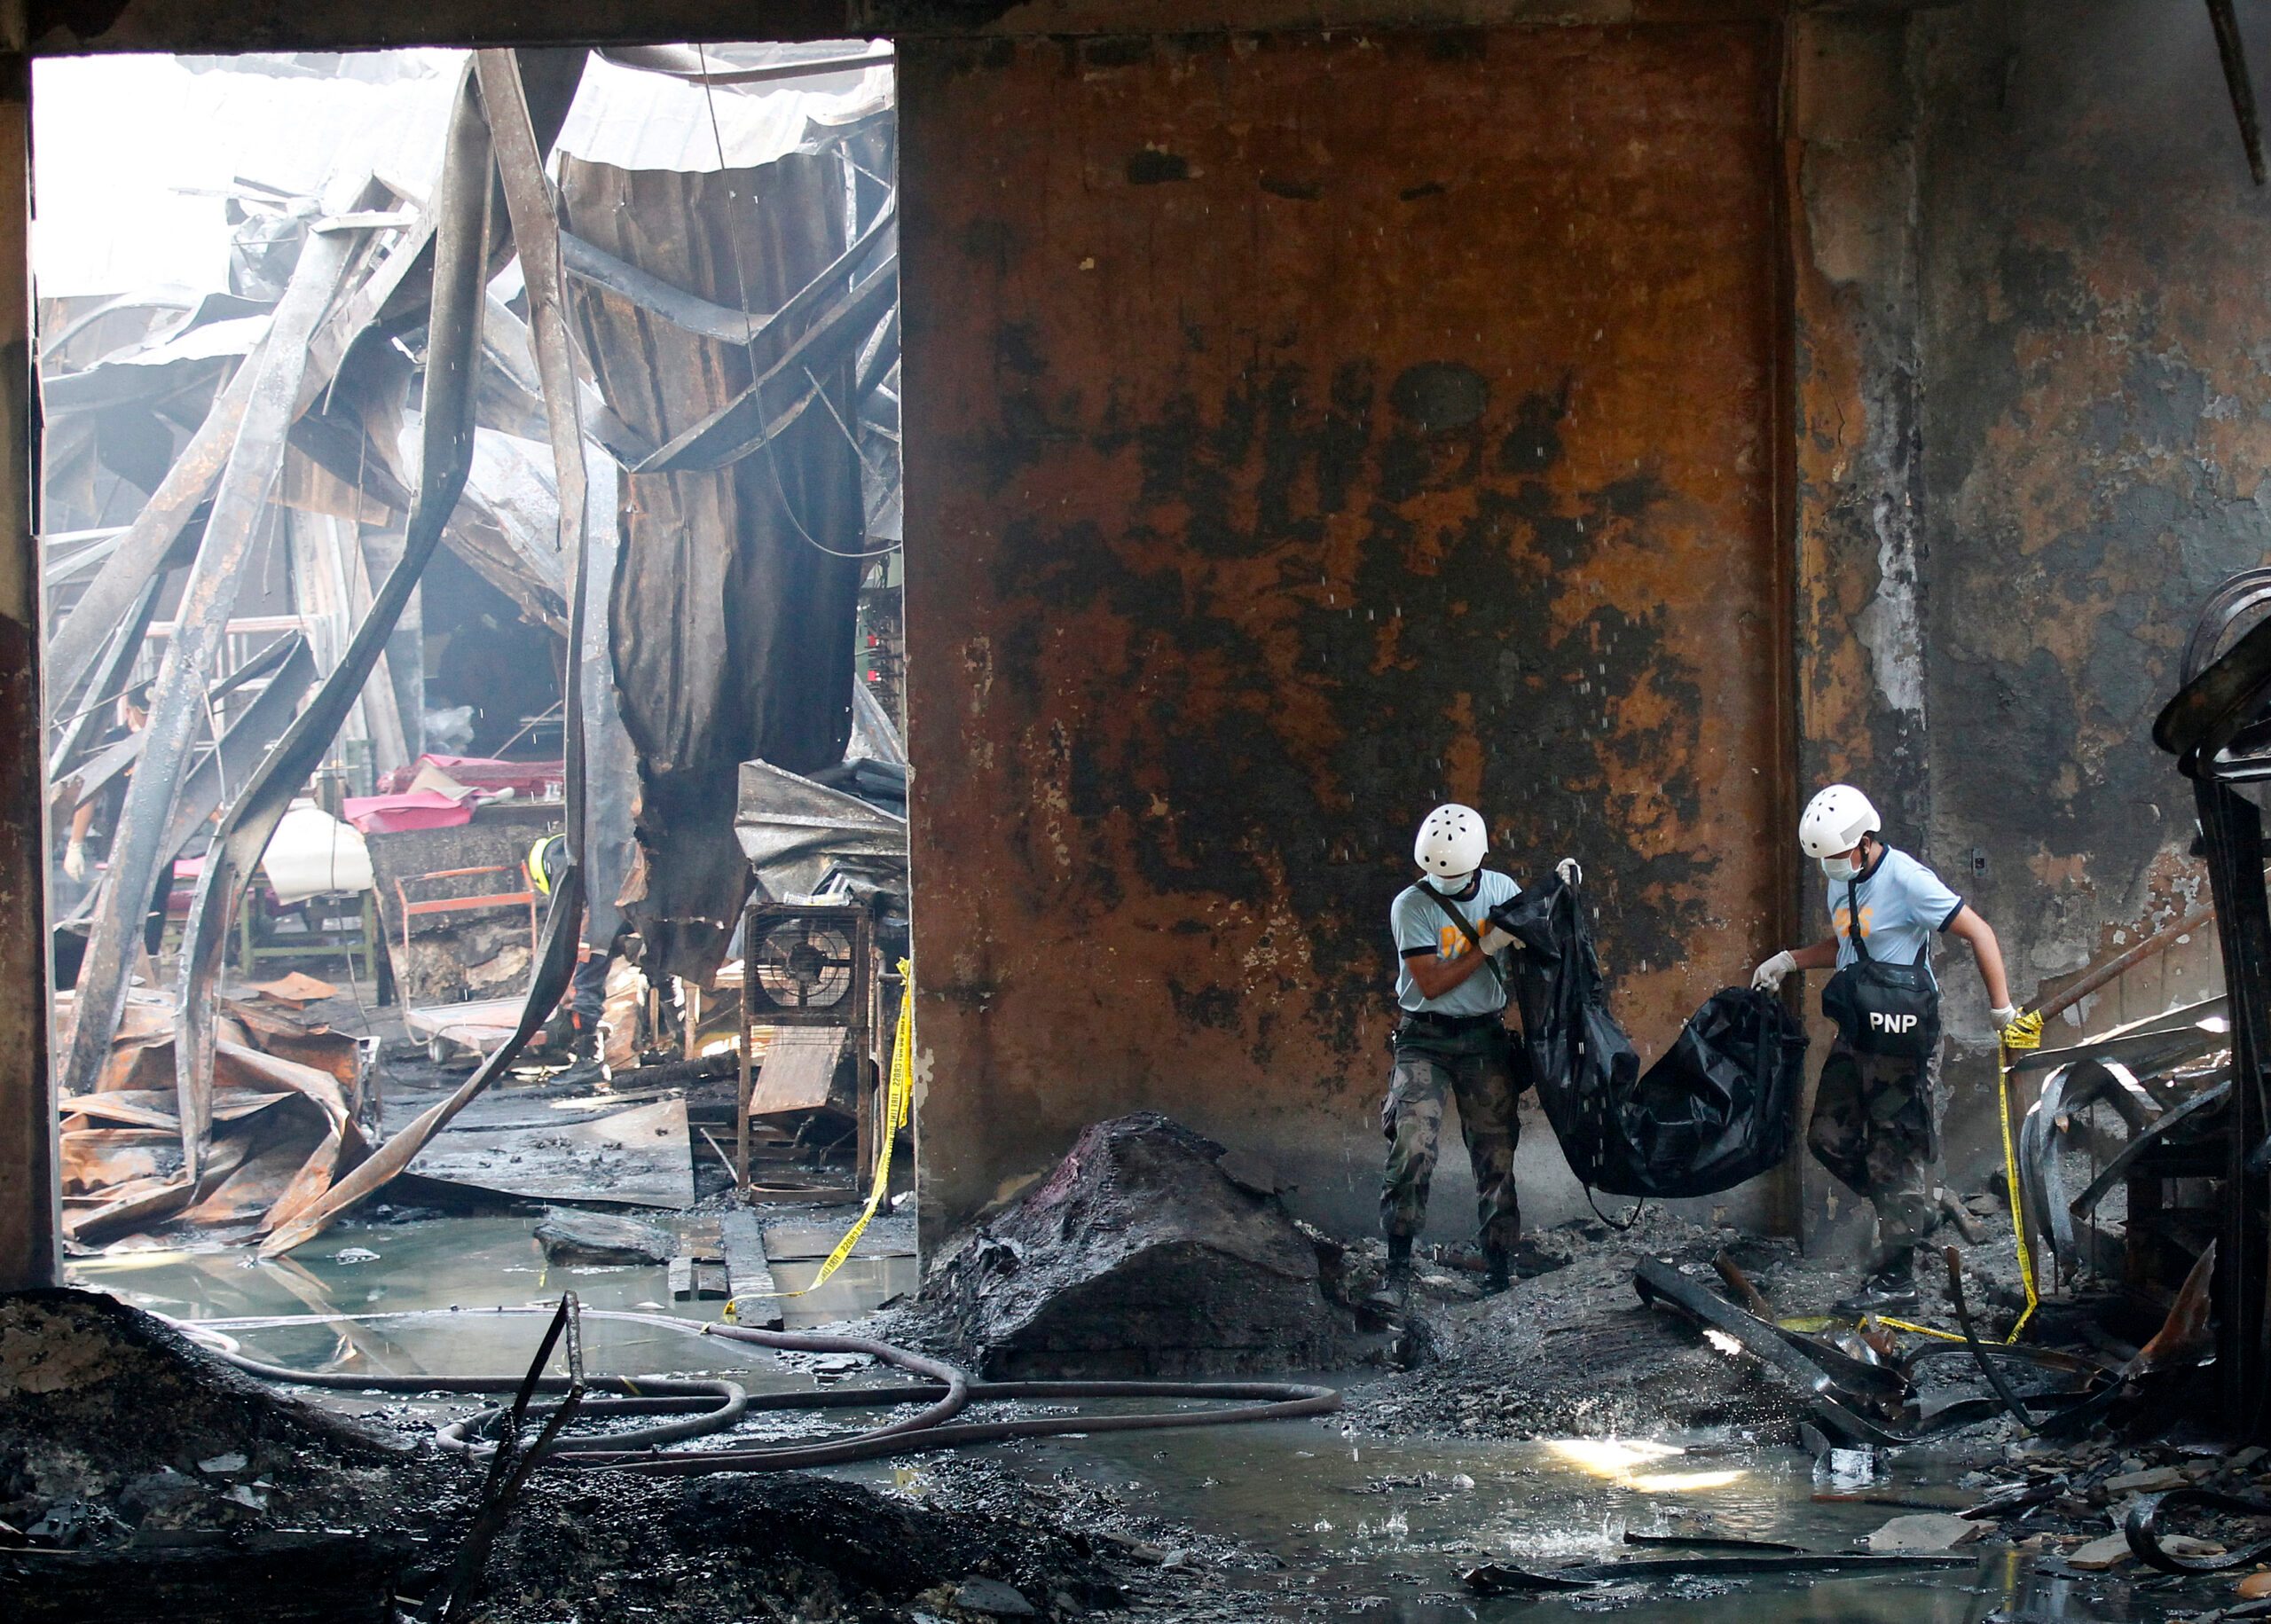 Gov’t pushes job safety laws after deadly factory fire